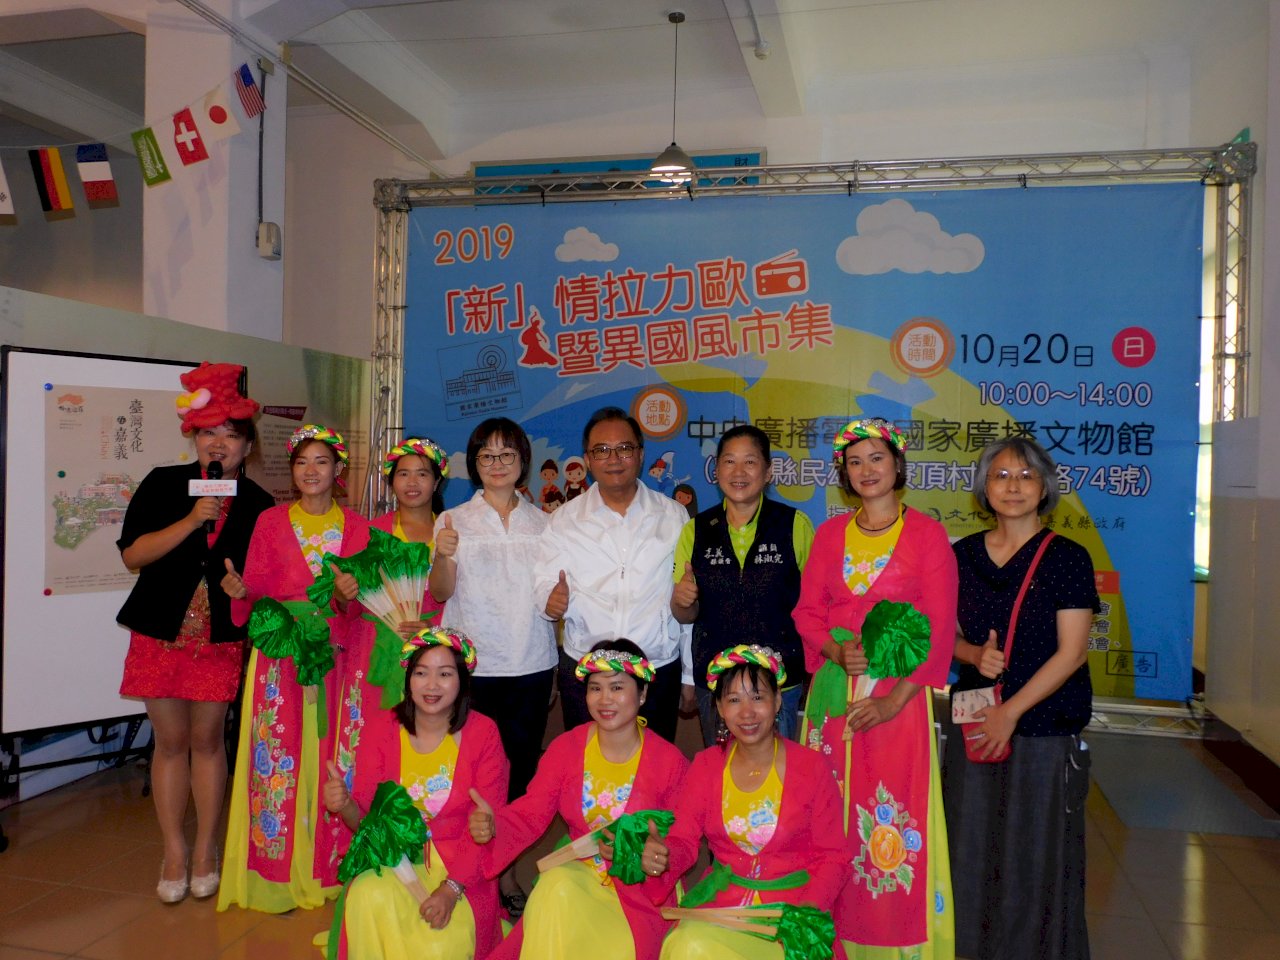 National Radio Museum held Radio and Cultural Fair on 20th, October. Attribute: Photo courtesy of Radio Taiwan International